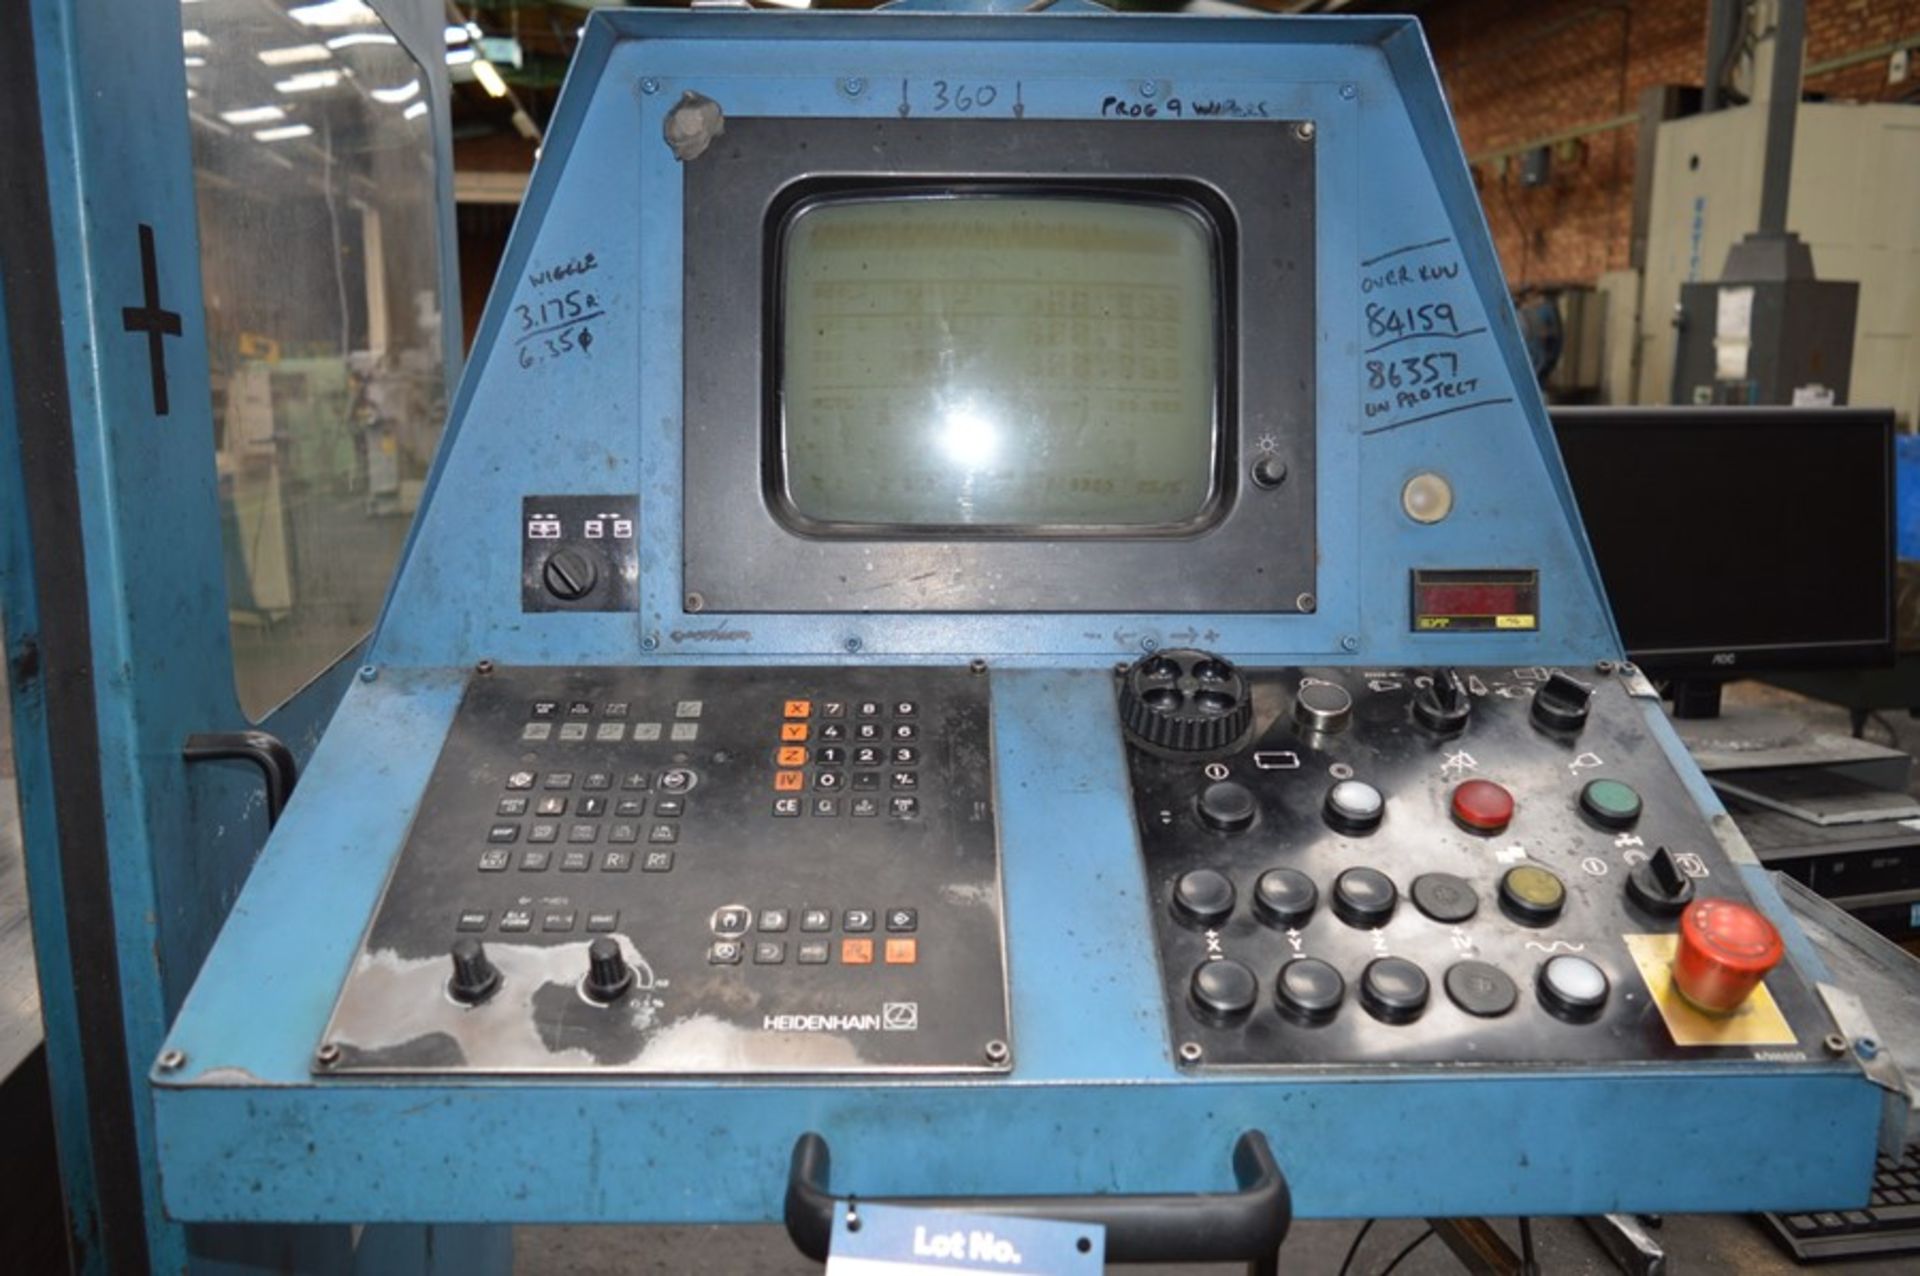 CME, BF-02 CNC bed type milling machine, Serial No. 02/133 (1996) with Heidehain CNC controls, - Image 7 of 10